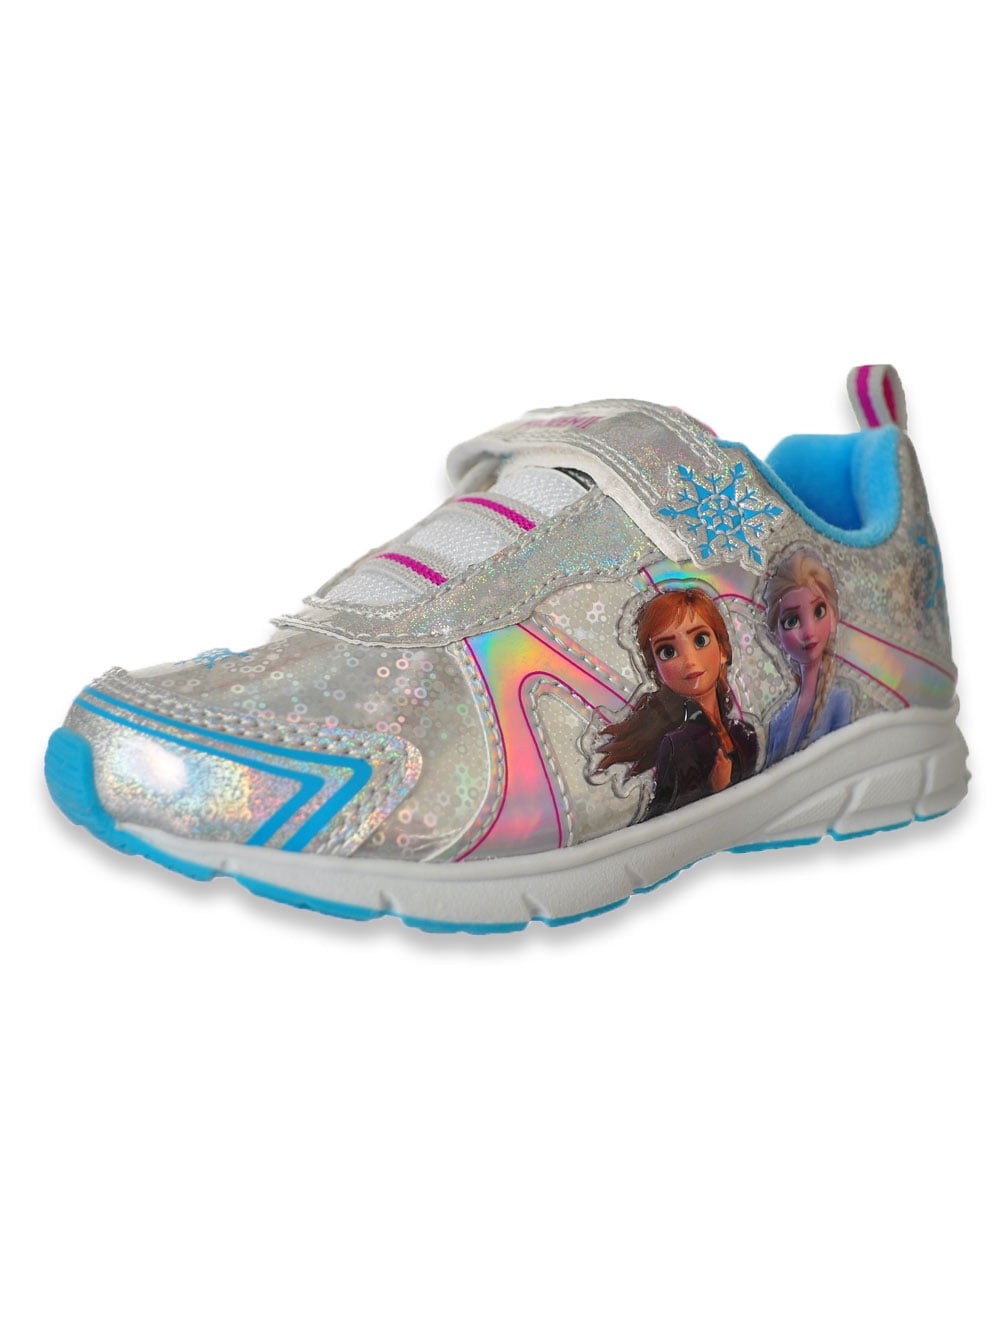 elsa and anna light up shoes